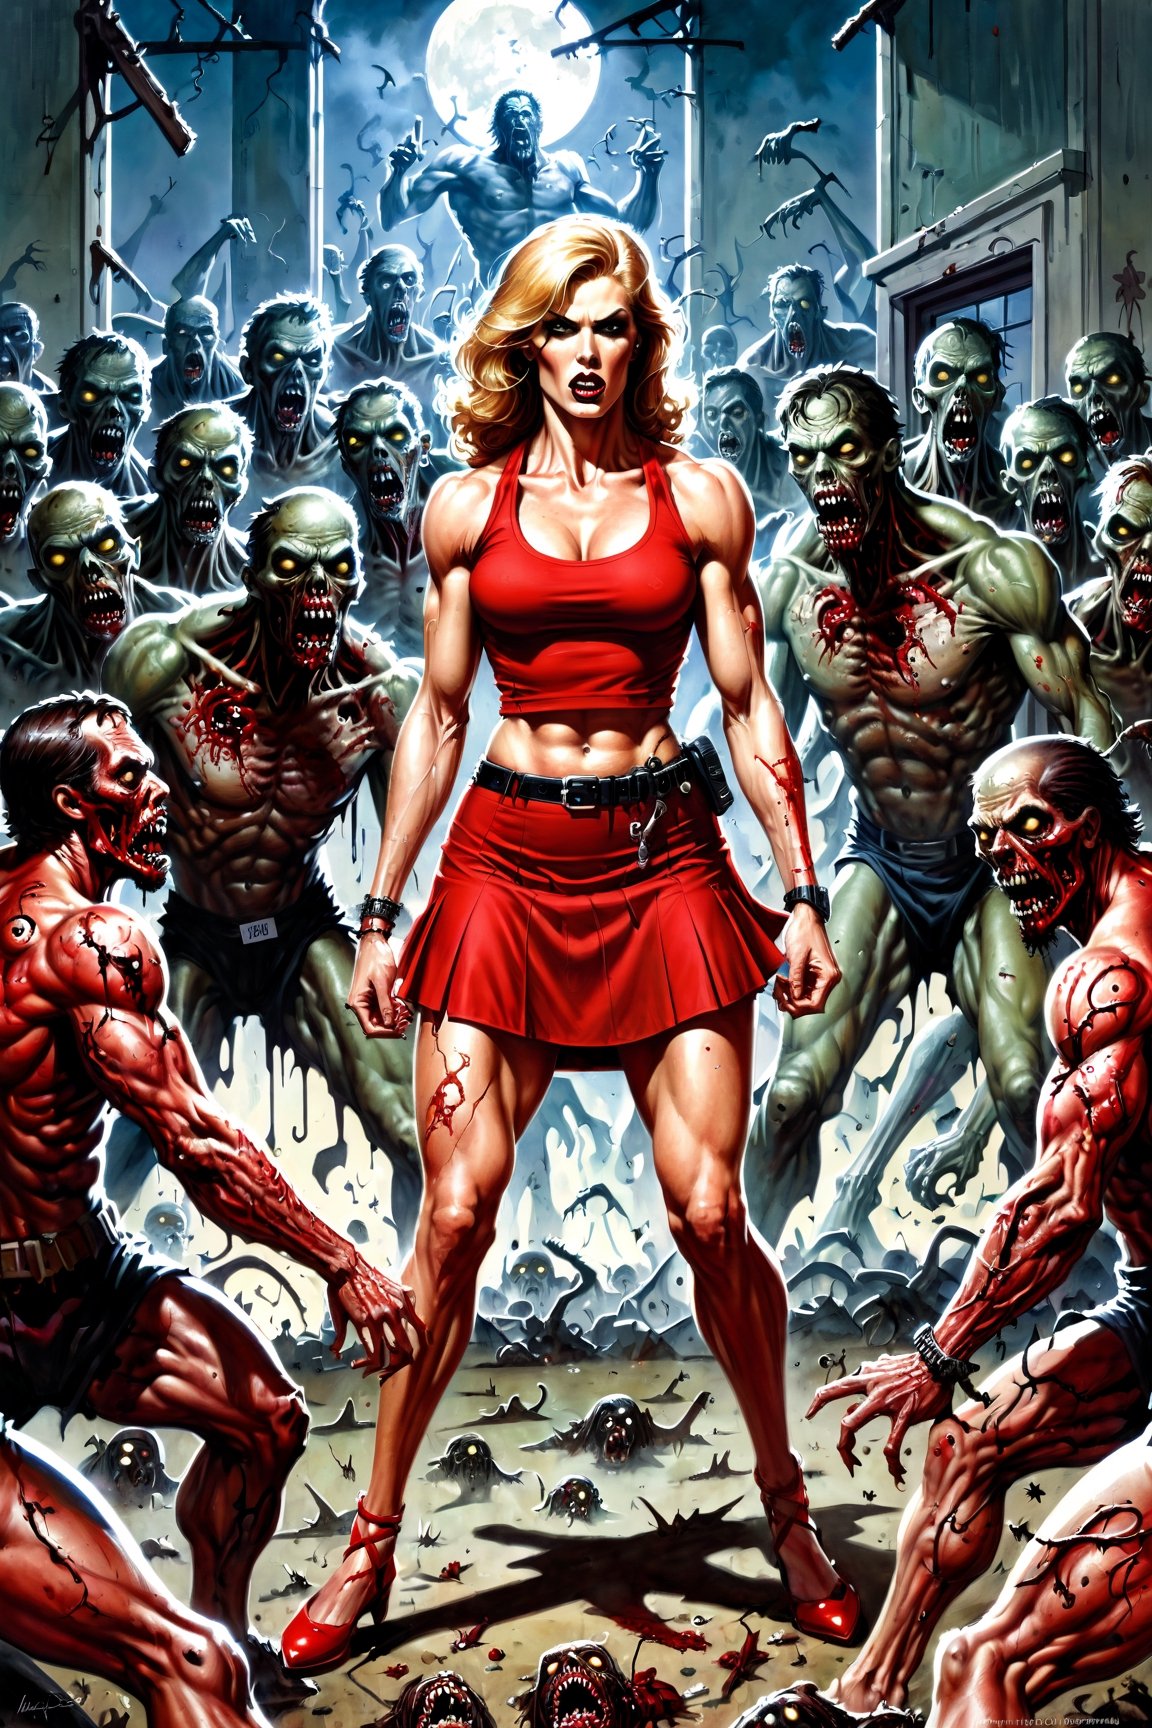 masterpiece, best quality, [detailed], [intricate], digital painting, a toned athlete muscular woman in a red skirt is surrounded by zombies, Barry Windsor Soares, Marcos Silvestri, Inspired by Clyde Caldwell(Clyde Caldwell), Clyde Caldwell, Frank Przetta, Richard Coben Style, Marcos Schulz, Mike Flug, John Bushma, Jeffrey Jones, Frank Frazzetta Cartoon Style, ( Fitzpatrick Art), Richard Coben and Frank Miller art style,